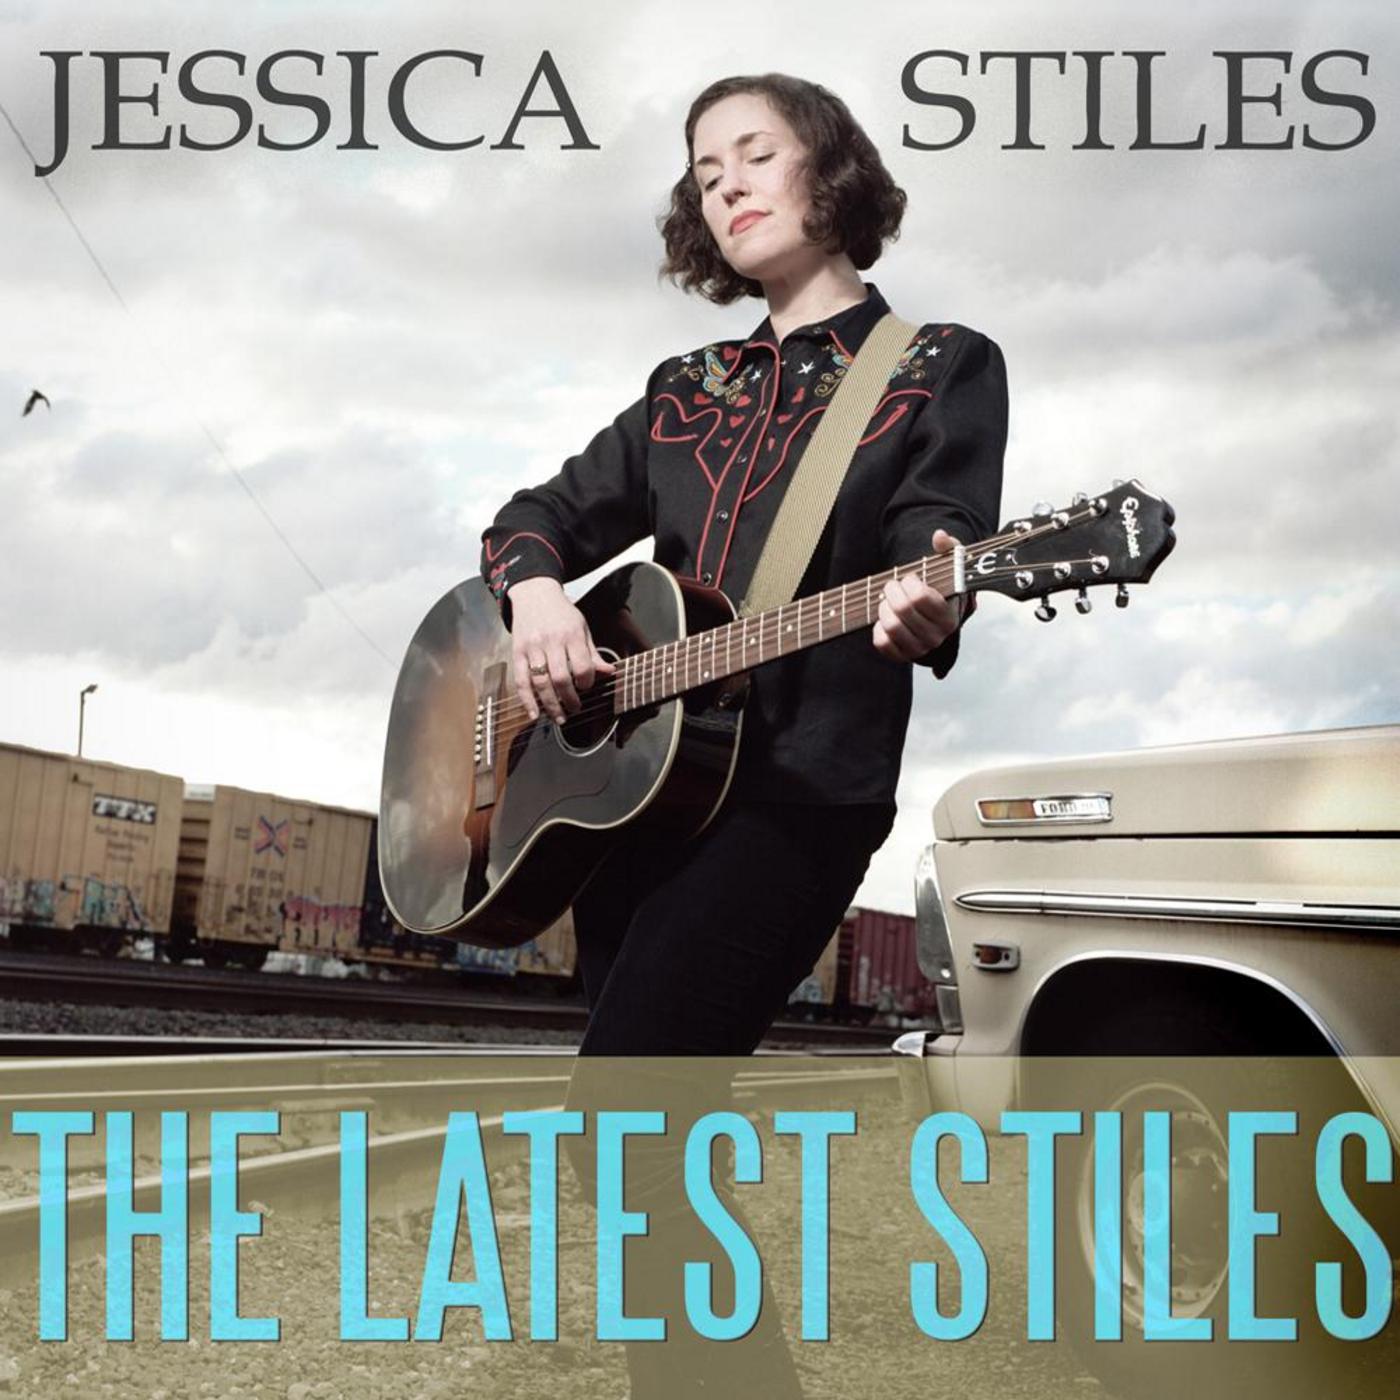 Jessica Stiles - If I Could Only Start Over